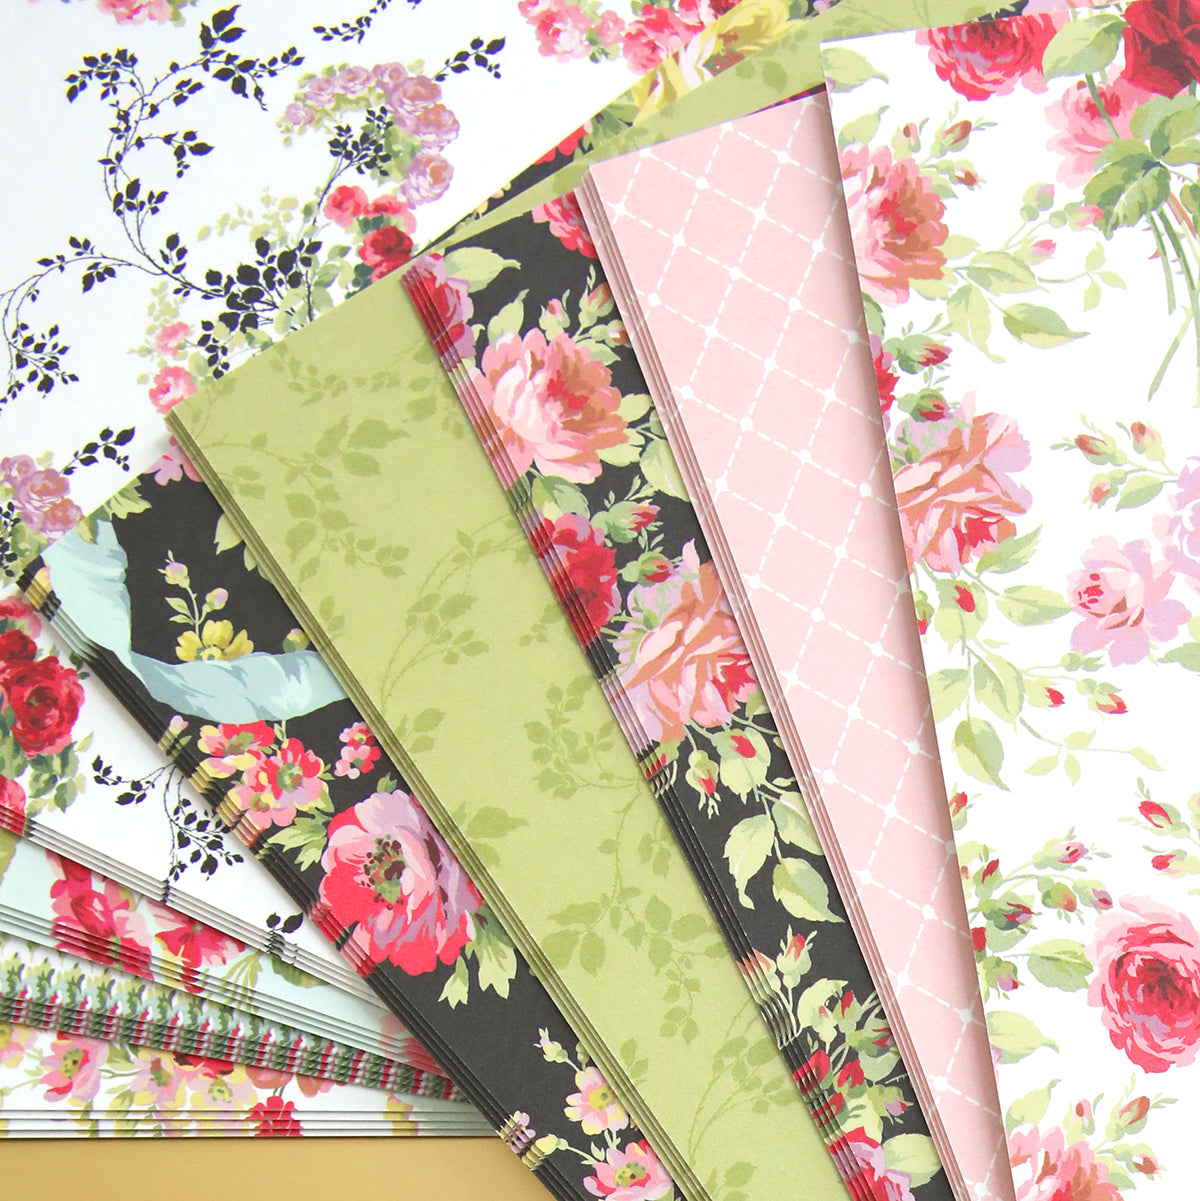 A stack of Garden Fountain Double Sided Cardstock layers with beautiful floral designs, perfect for paper crafting enthusiasts or fans of Garden Fountain.